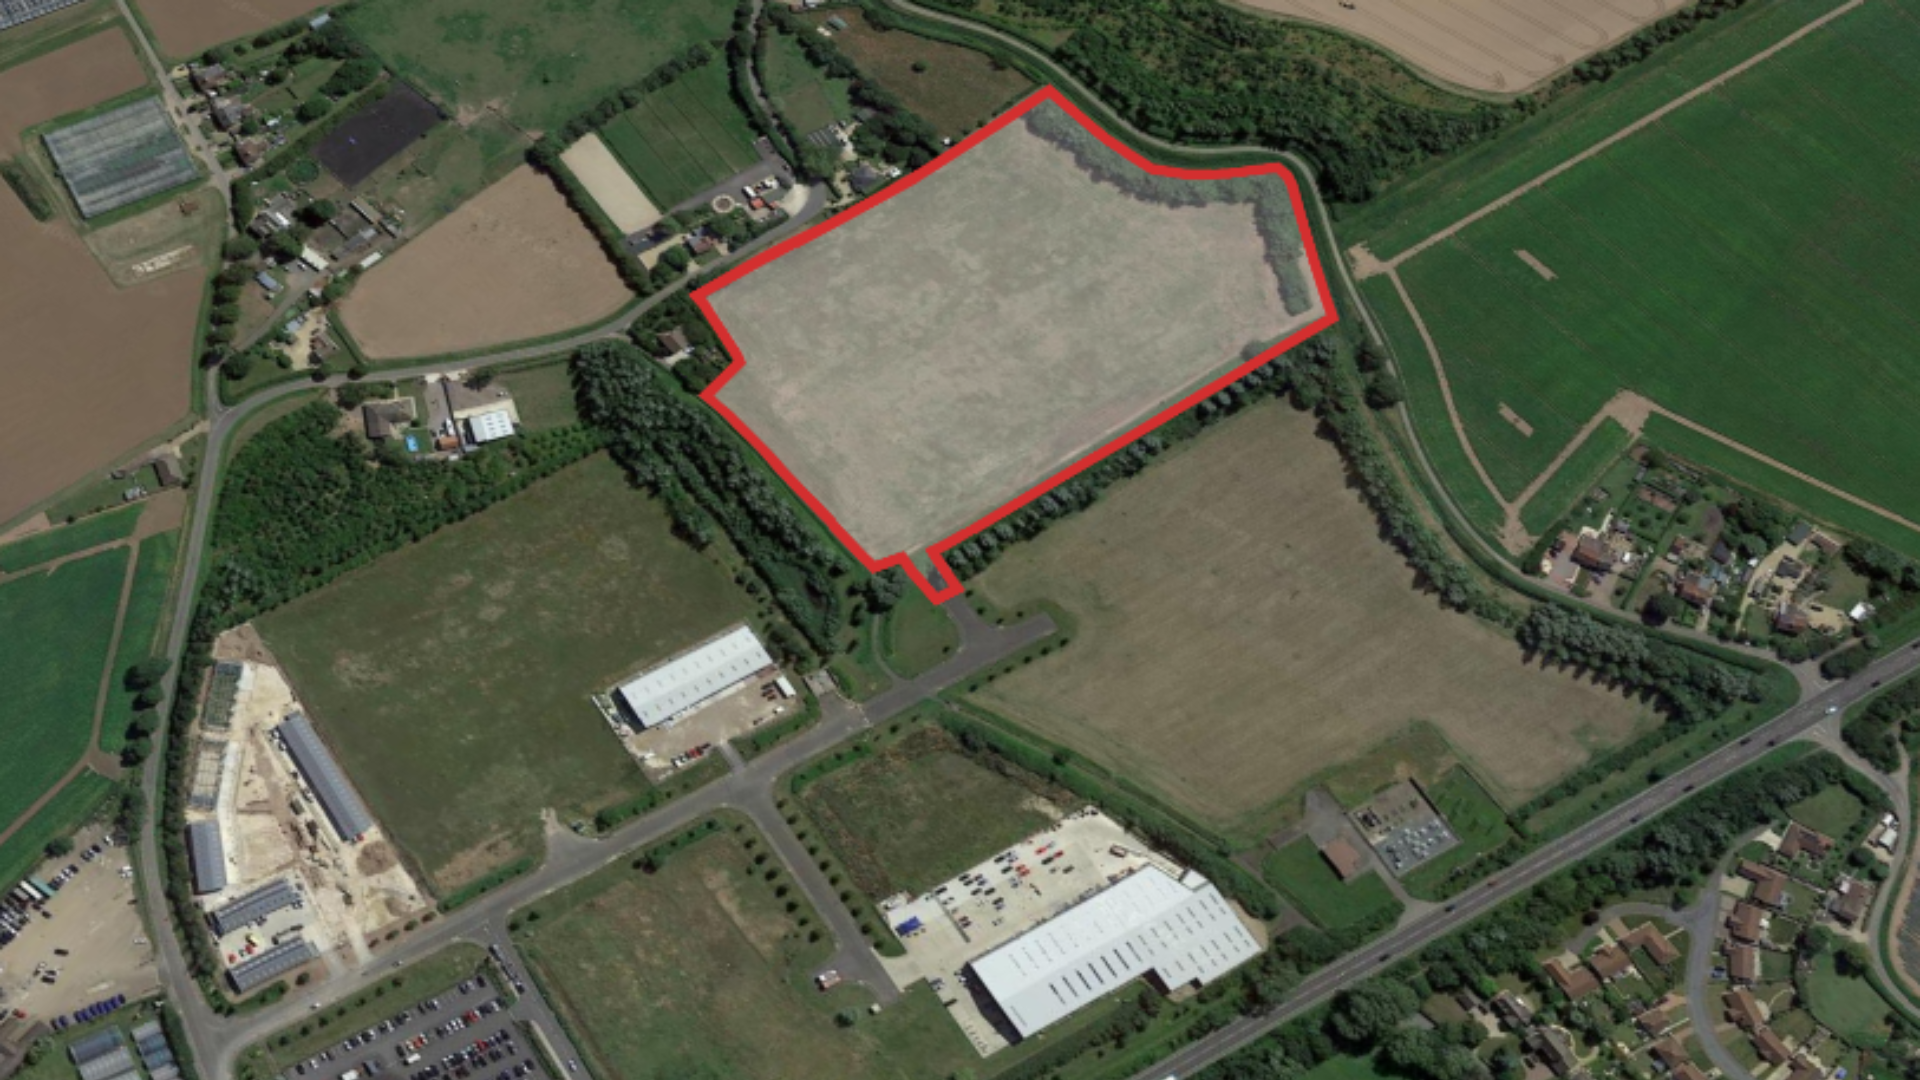 An aerial view of the land sold at Kirton